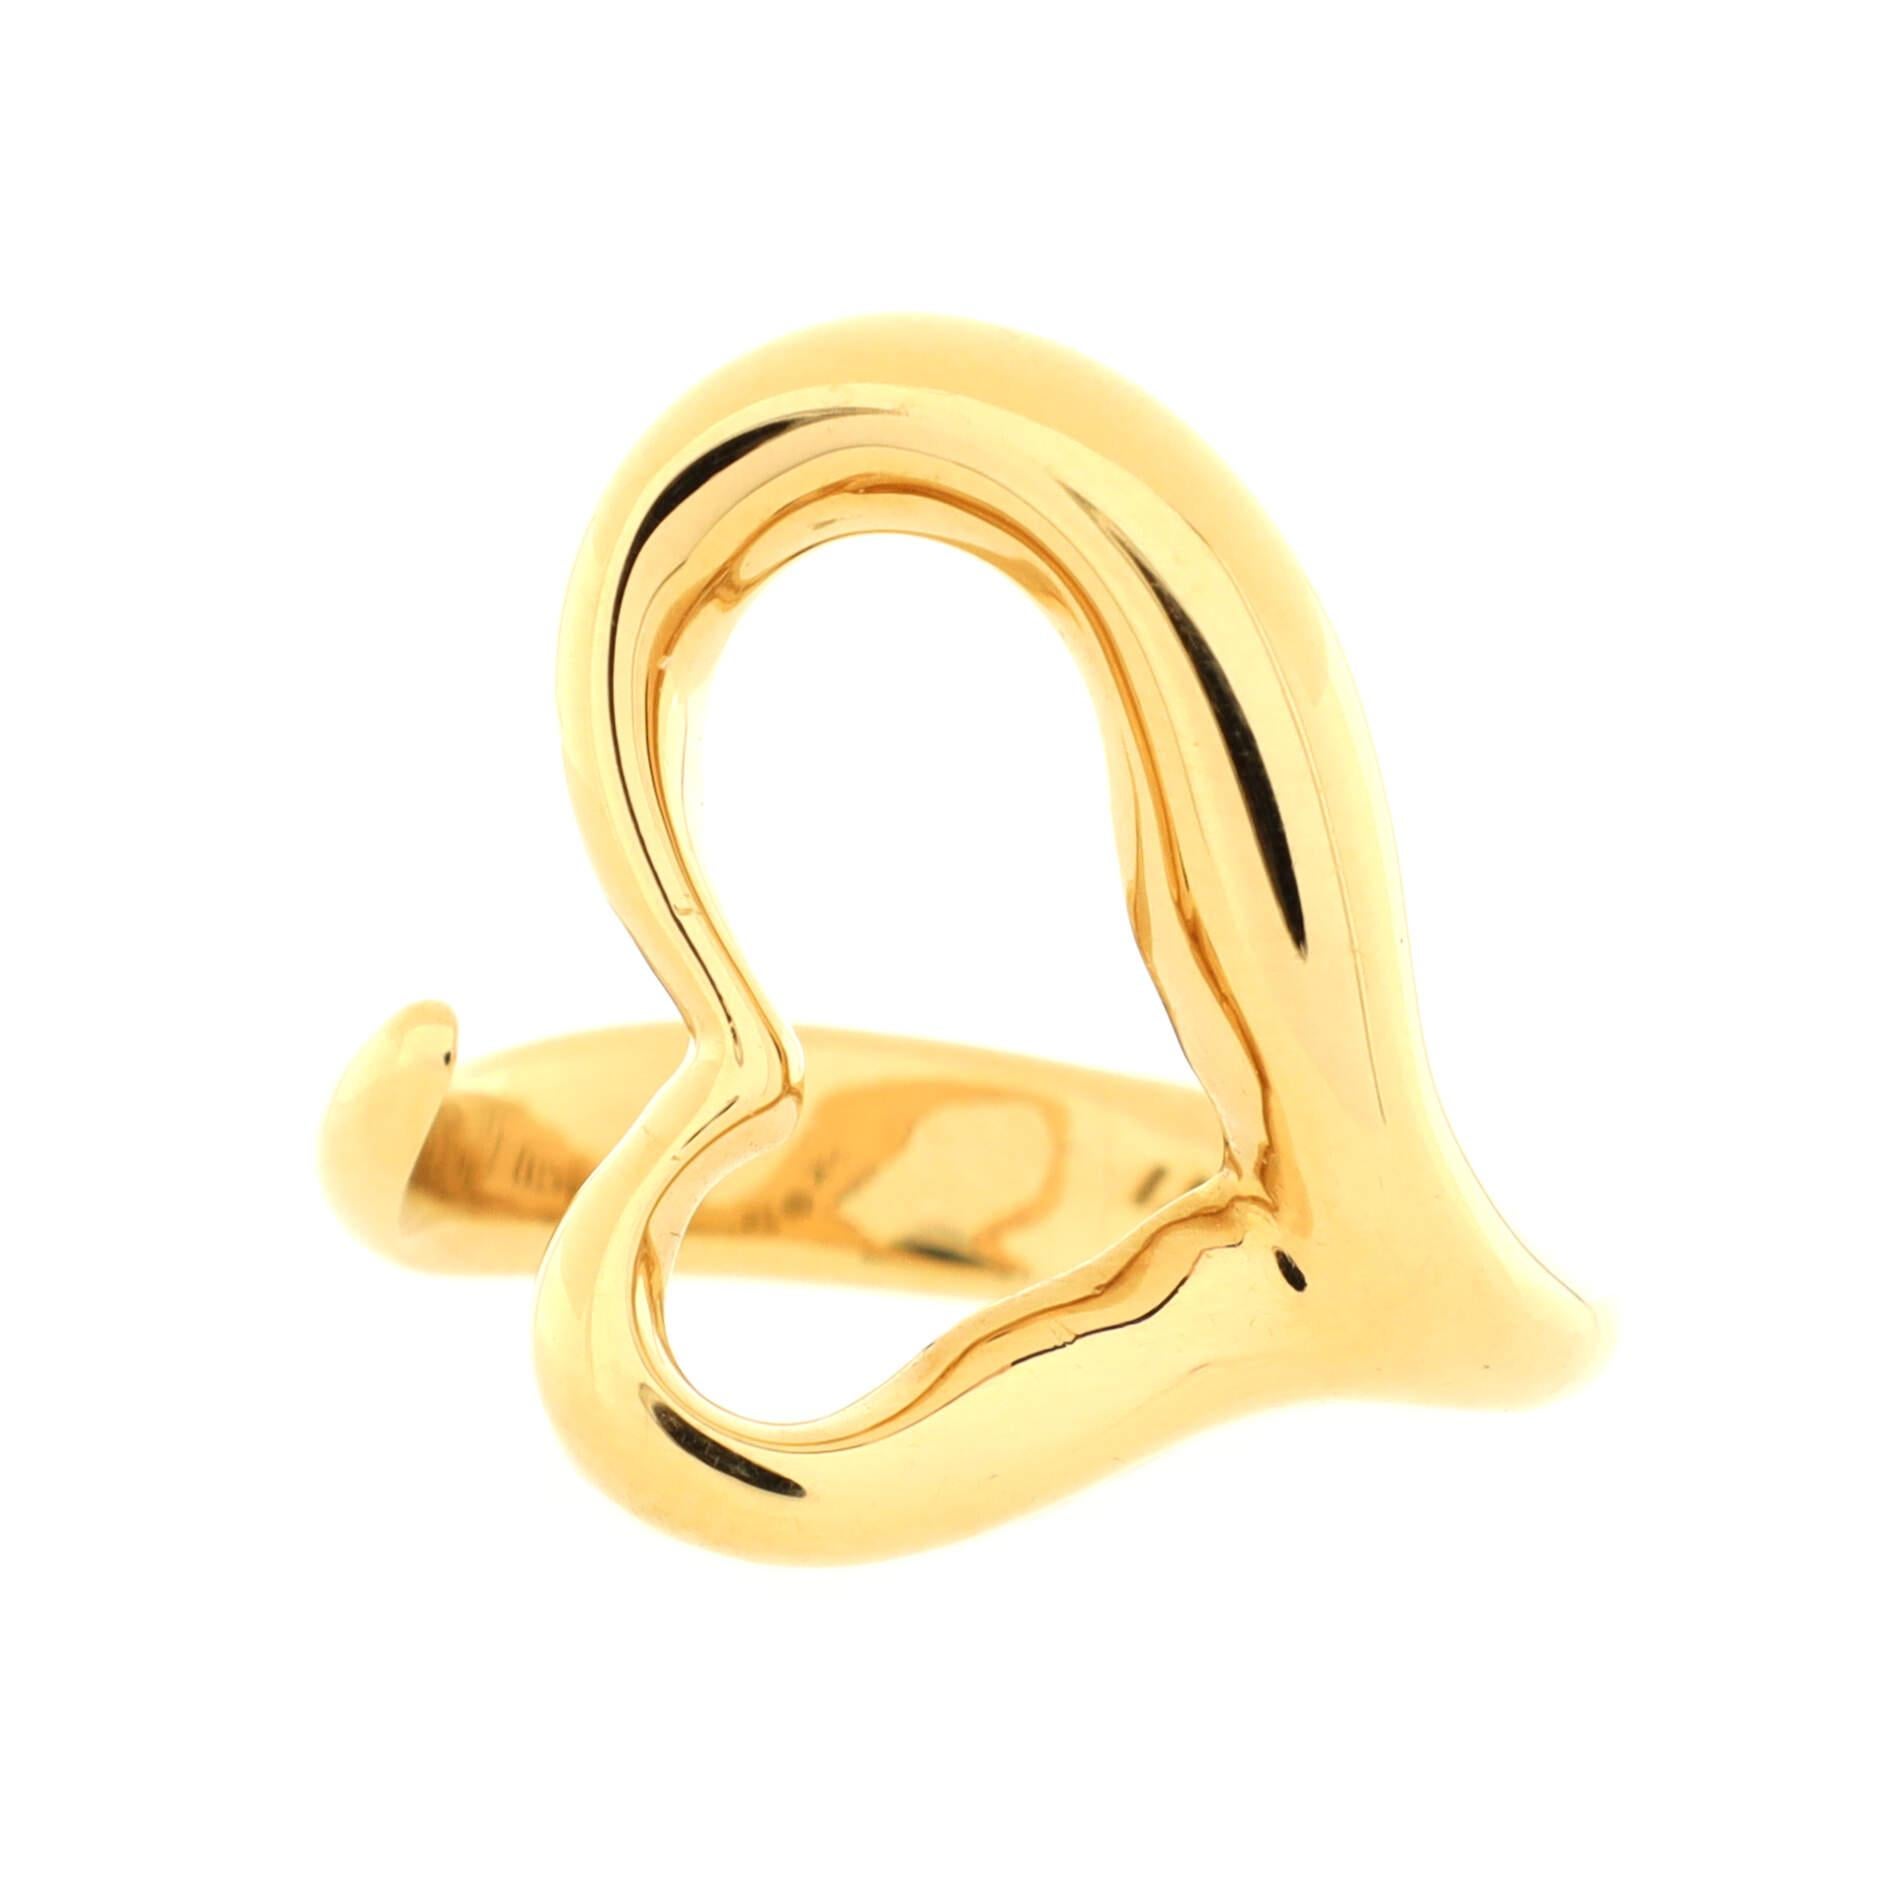 Condition: Very good. Moderate wear throughout.
Accessories: No Accessories
Measurements: Size: 5.5, Width: 4 mm
Designer: Tiffany & Co.
Model: Elsa Peretti Open Heart Ring 18K Yellow Gold Large
Exterior Color: Yellow Gold
Item Number: 214403/11